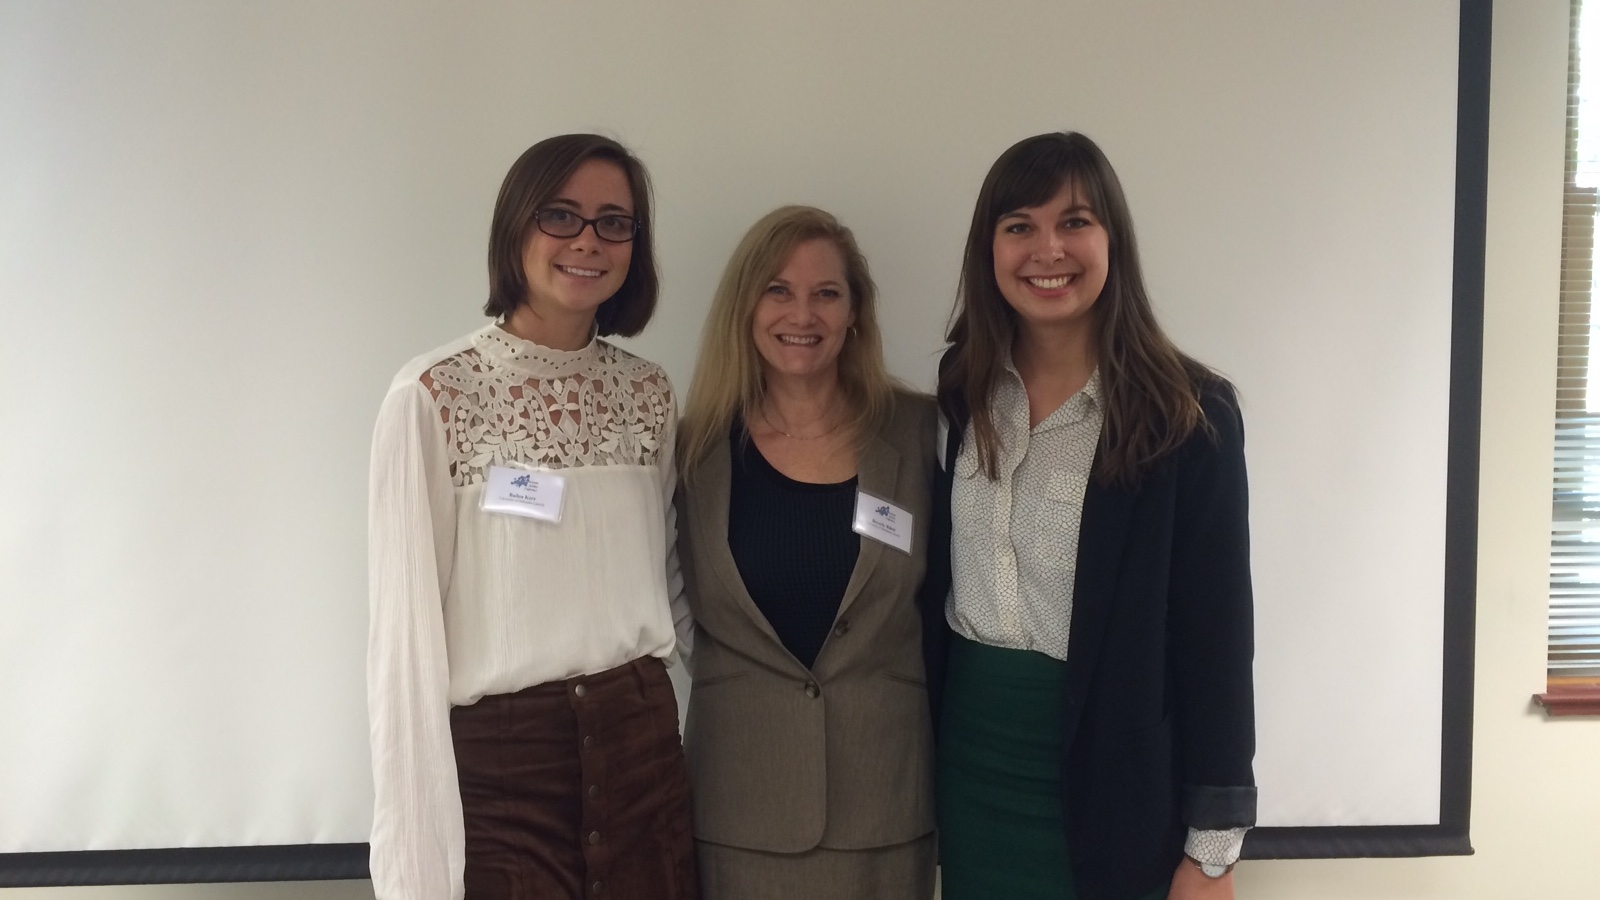 Bailea Kerr, Dr. Beverley Rilett, and Roz Thalken at the European Studies Conference; links to news story